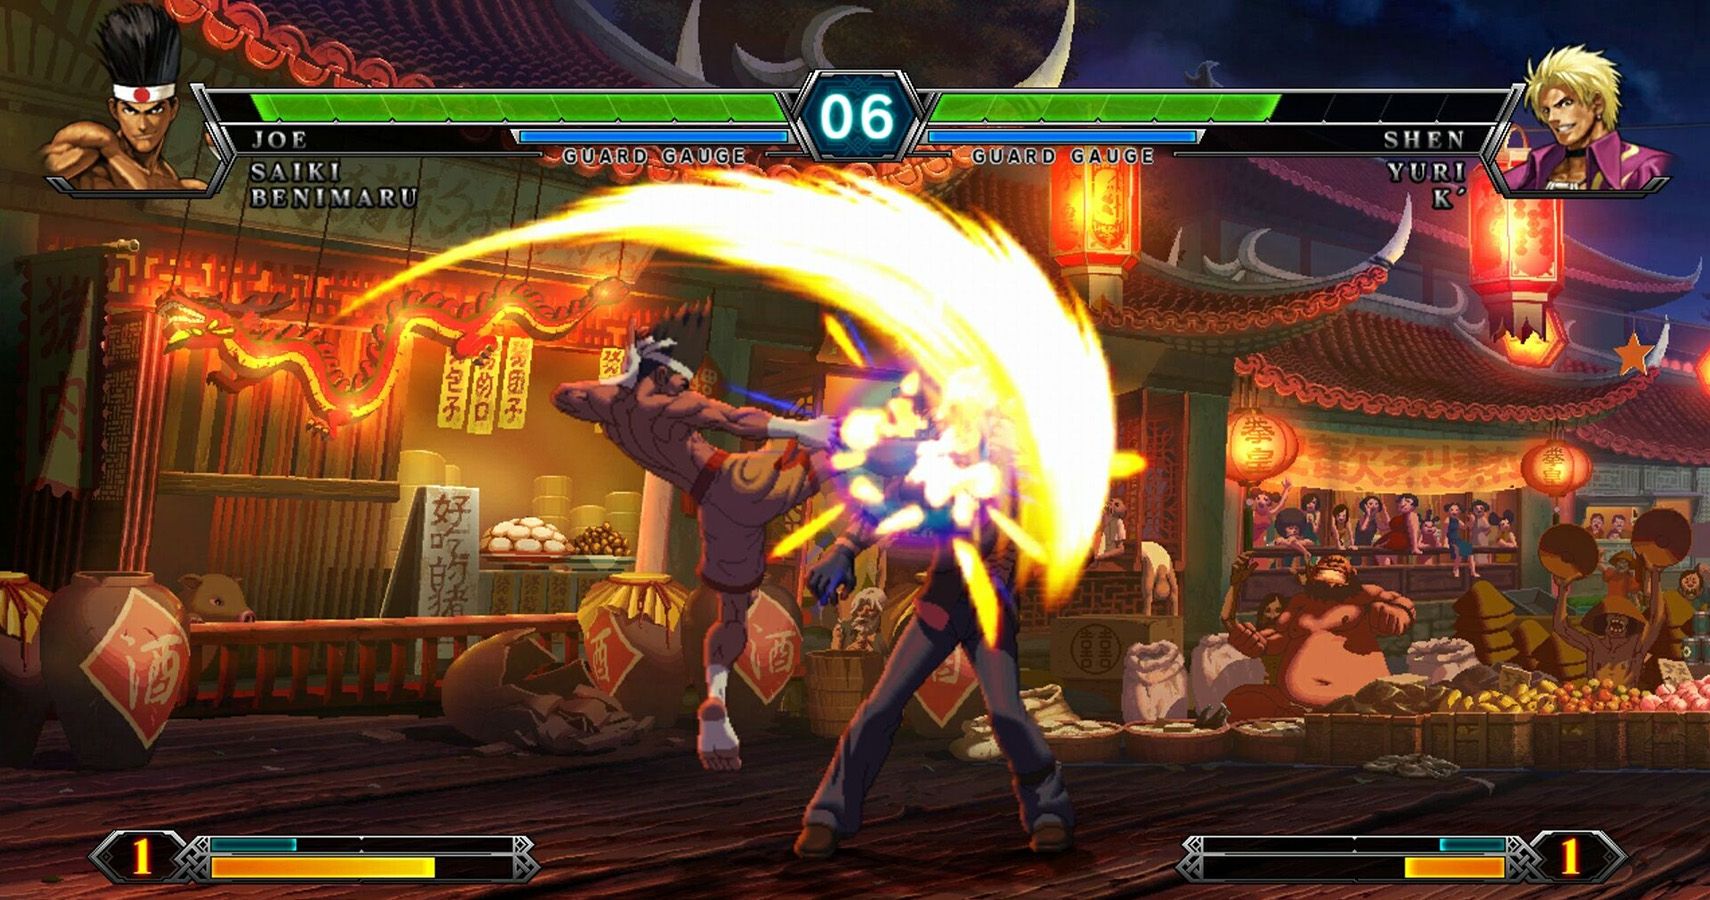 Joe kicks Shen at a festival in The King Of Fighters 13.